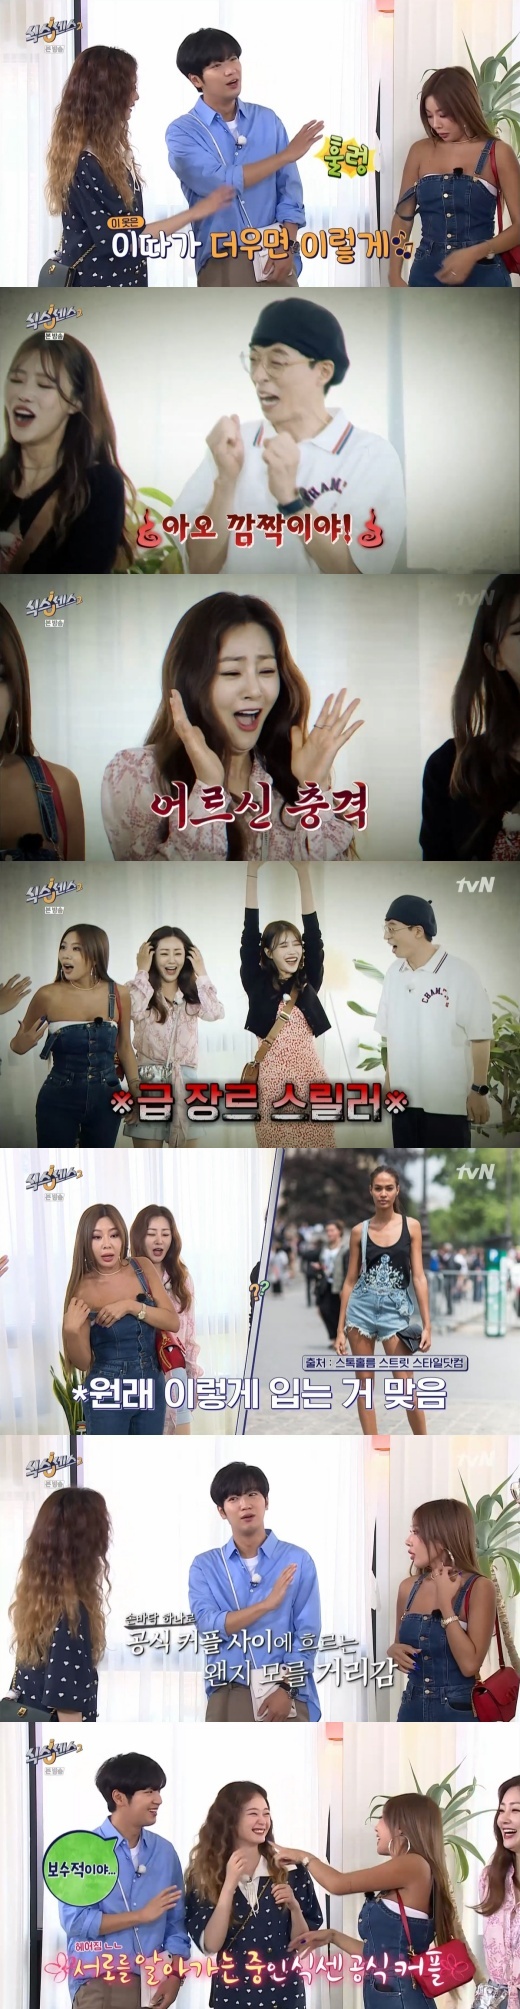 Broadcasters Yoo Jae-Suk and Oh Na-ra were seen embarrassed by Singer Jessies extraordinary Exposure.On the 6th cable channel tvN Sixth Sense Season 2, Yoo Jae-Suk, Oh Na-ra, Jeon So-min, Jessie, Lee Mi-joo and Lee Sang-yeob appeared and discussed their fashion.Jessie wore a bra top and suspender pants and showed off her fashionista face. Yoo Jae-Suk commented on his fashion, saying, Jessie just put out the chaff.Jessie then took off the suspender straps and surprised the cast, saying, If its hot, itll be down later. Oh Na-ra screamed and said, Im crazy, Im crazy!I hit him and laughed.Lee Sang-yeob, who has the modifier of Sixth Sense Jessies official couple, also covered Jessie with his hand and swept down Chest, who was really surprised.Jessie laughed and hurriedly explained, The original suspender is falling.